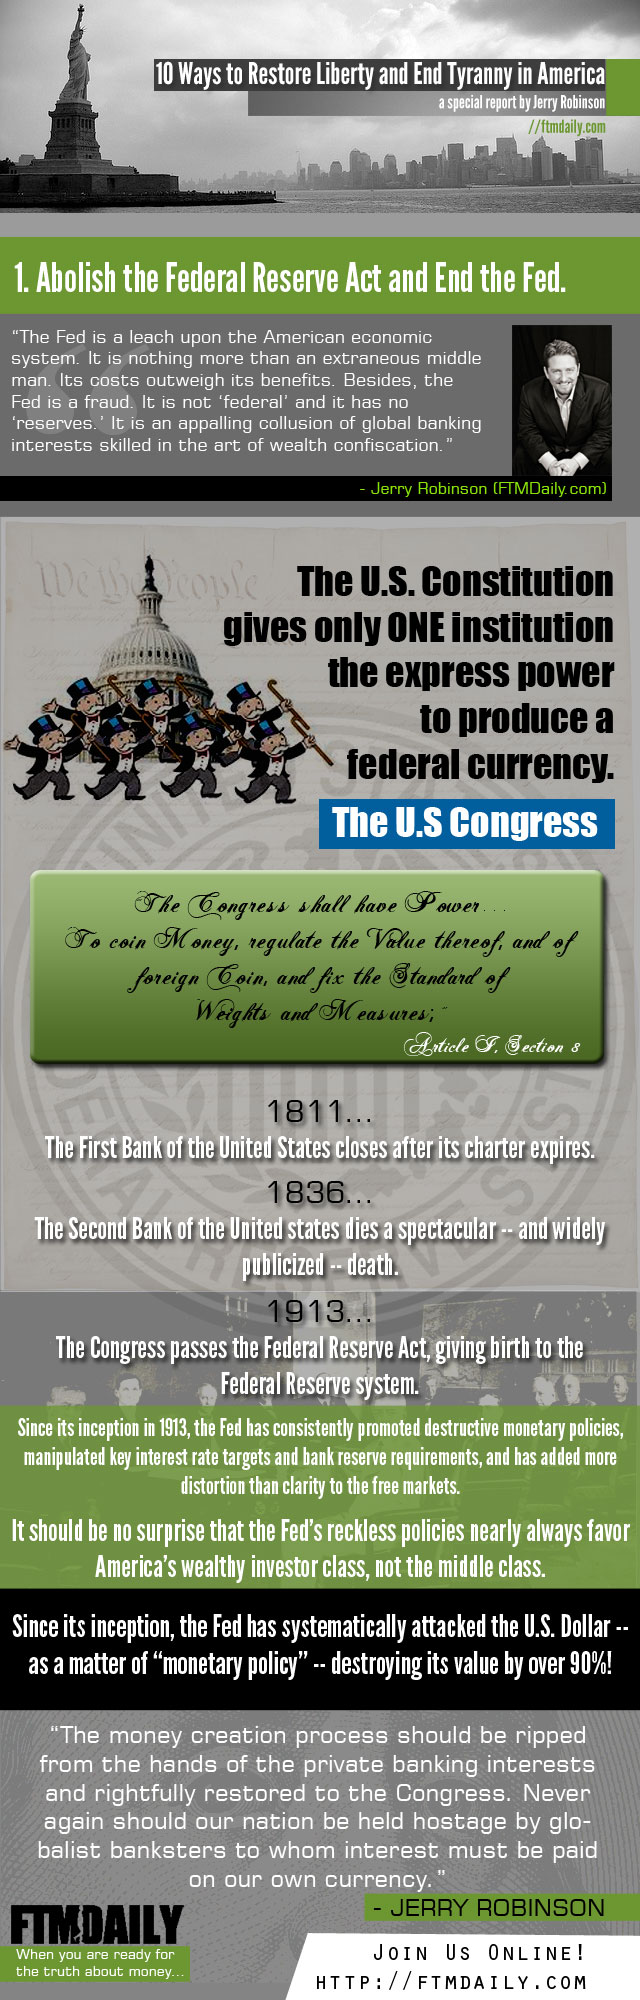 INFOGRAPHIC: End the Fed Now